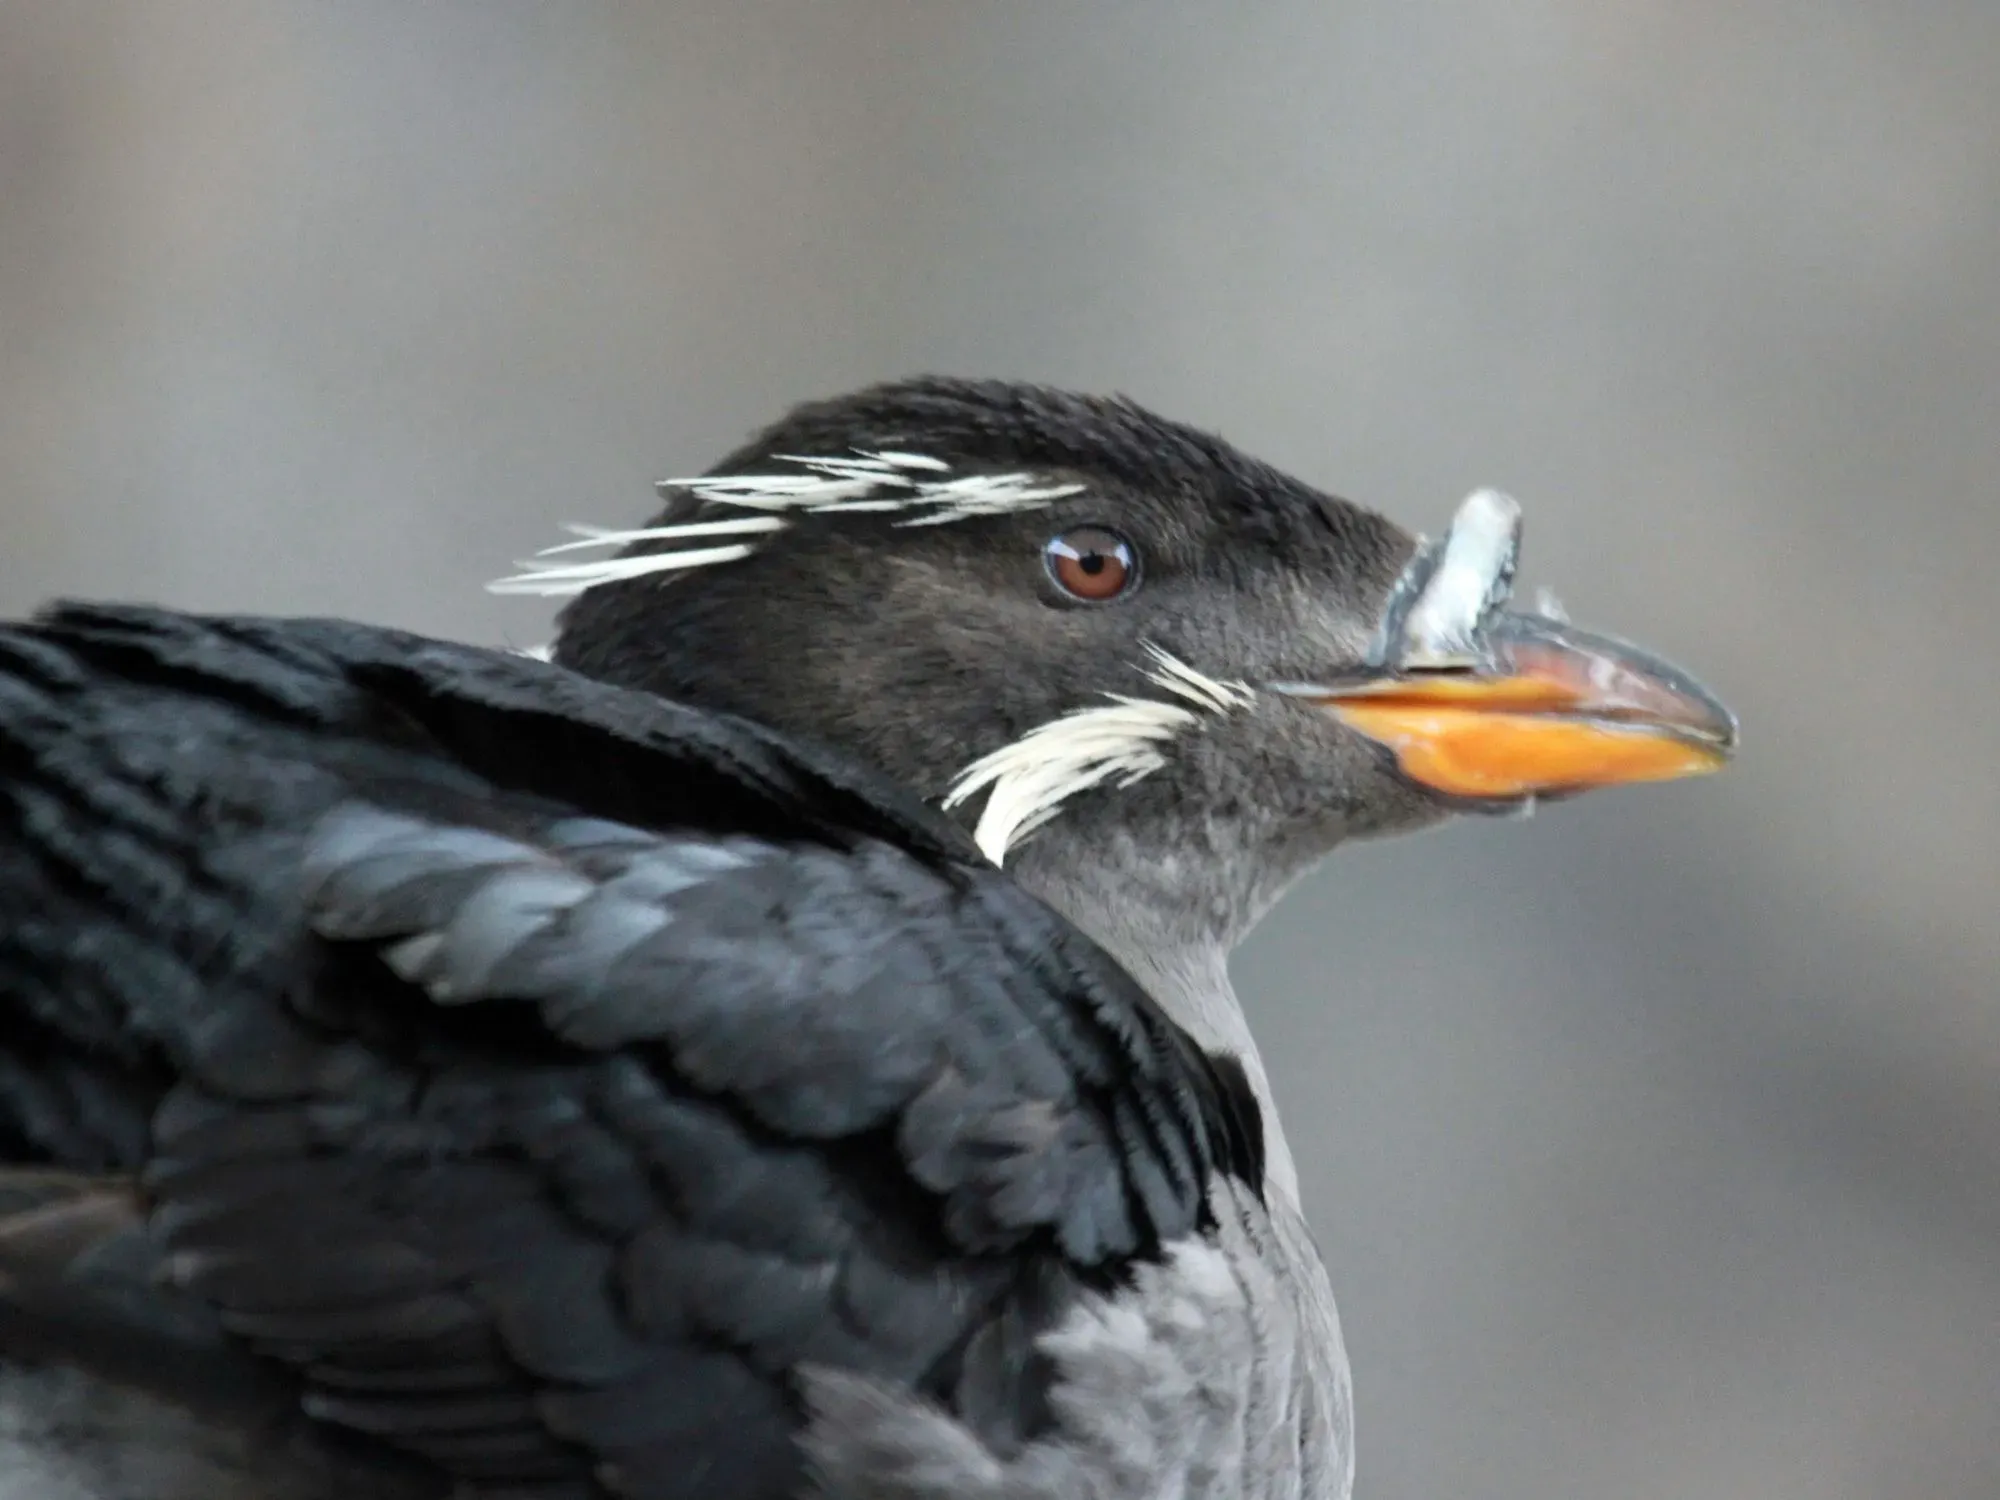 Auklets are small to medium-sized birds found mostly in the Pacific Ocean and different parts of the world.